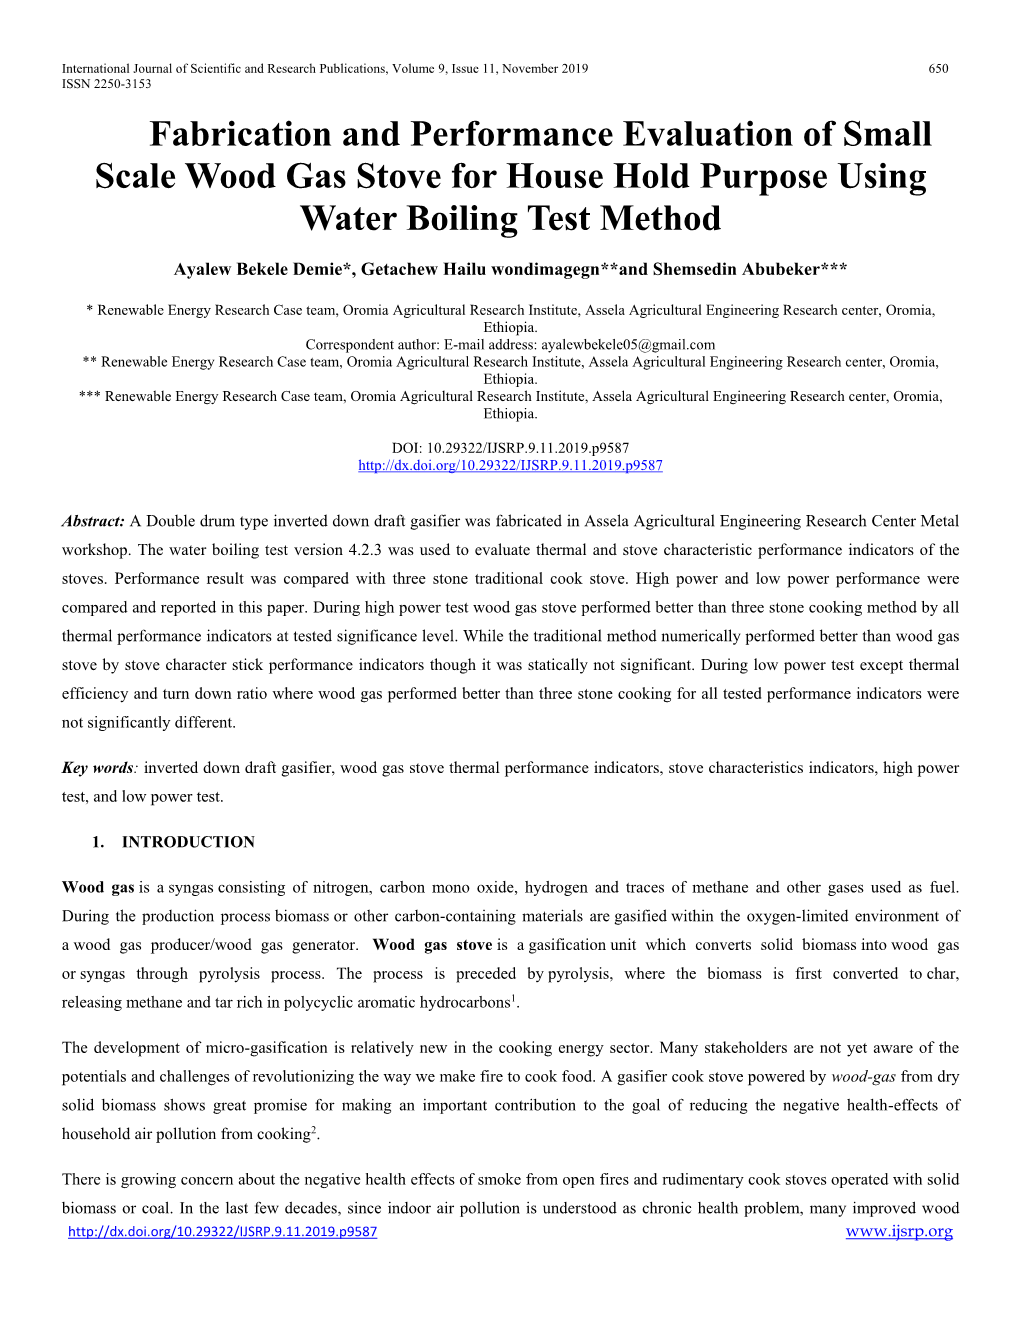 Fabrication and Performance Evaluation of Small Scale Wood Gas Stove for House Hold Purpose Using Water Boiling Test Method